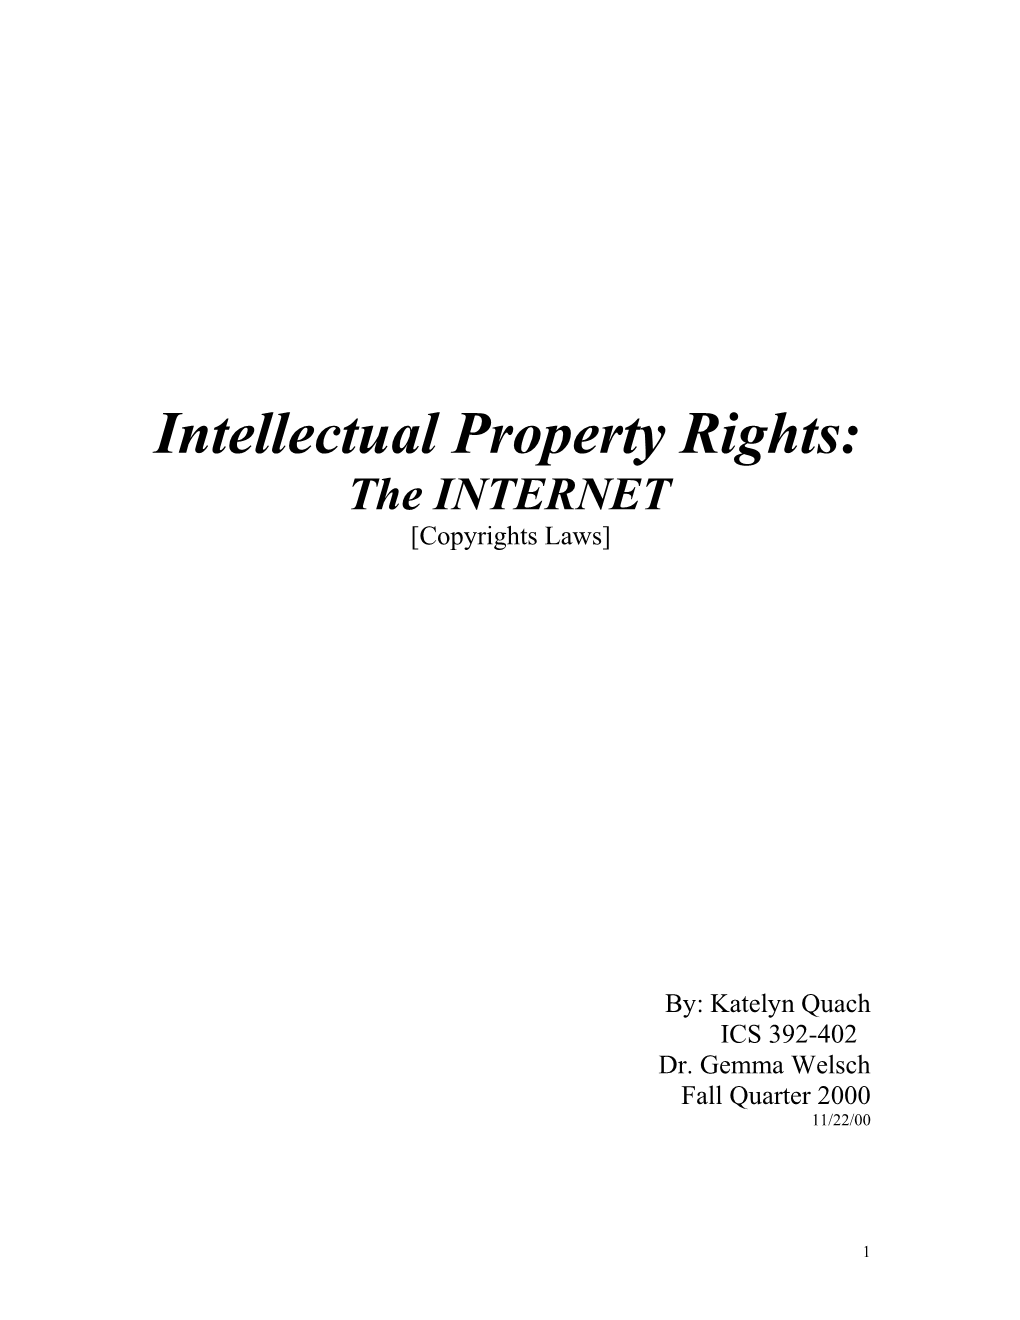 Internet Property Rights